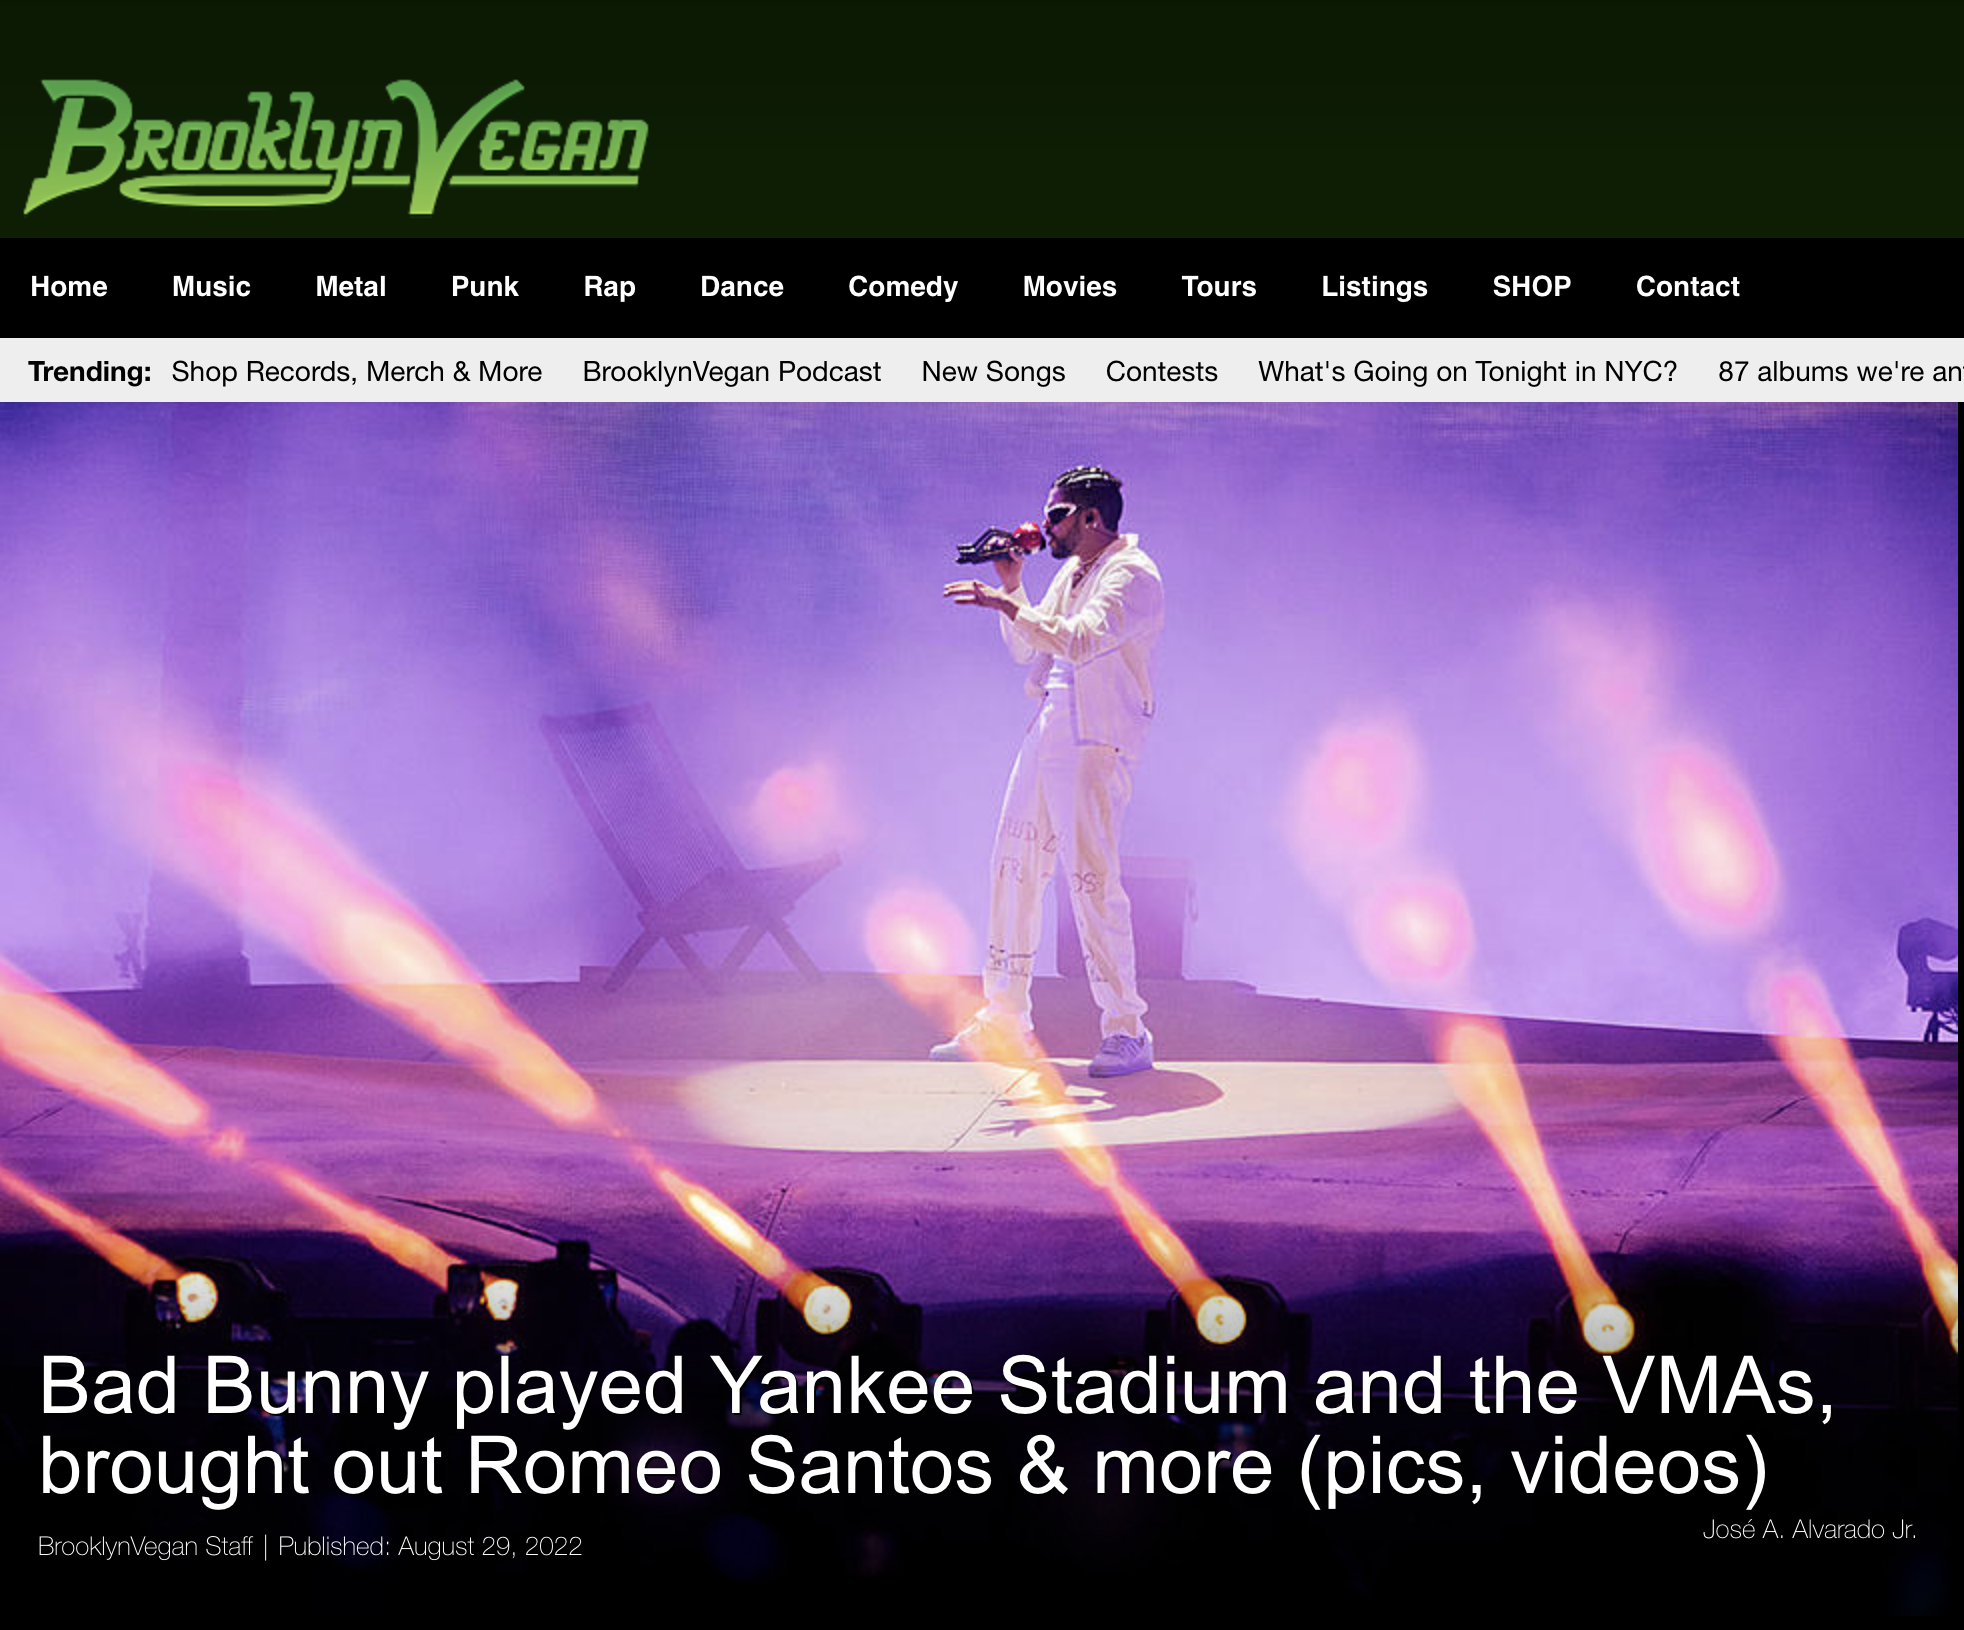 for Brooklyn Vegan: Bad Bunny played Yankee Stadium and the VMAs, brought out Romeo Santos